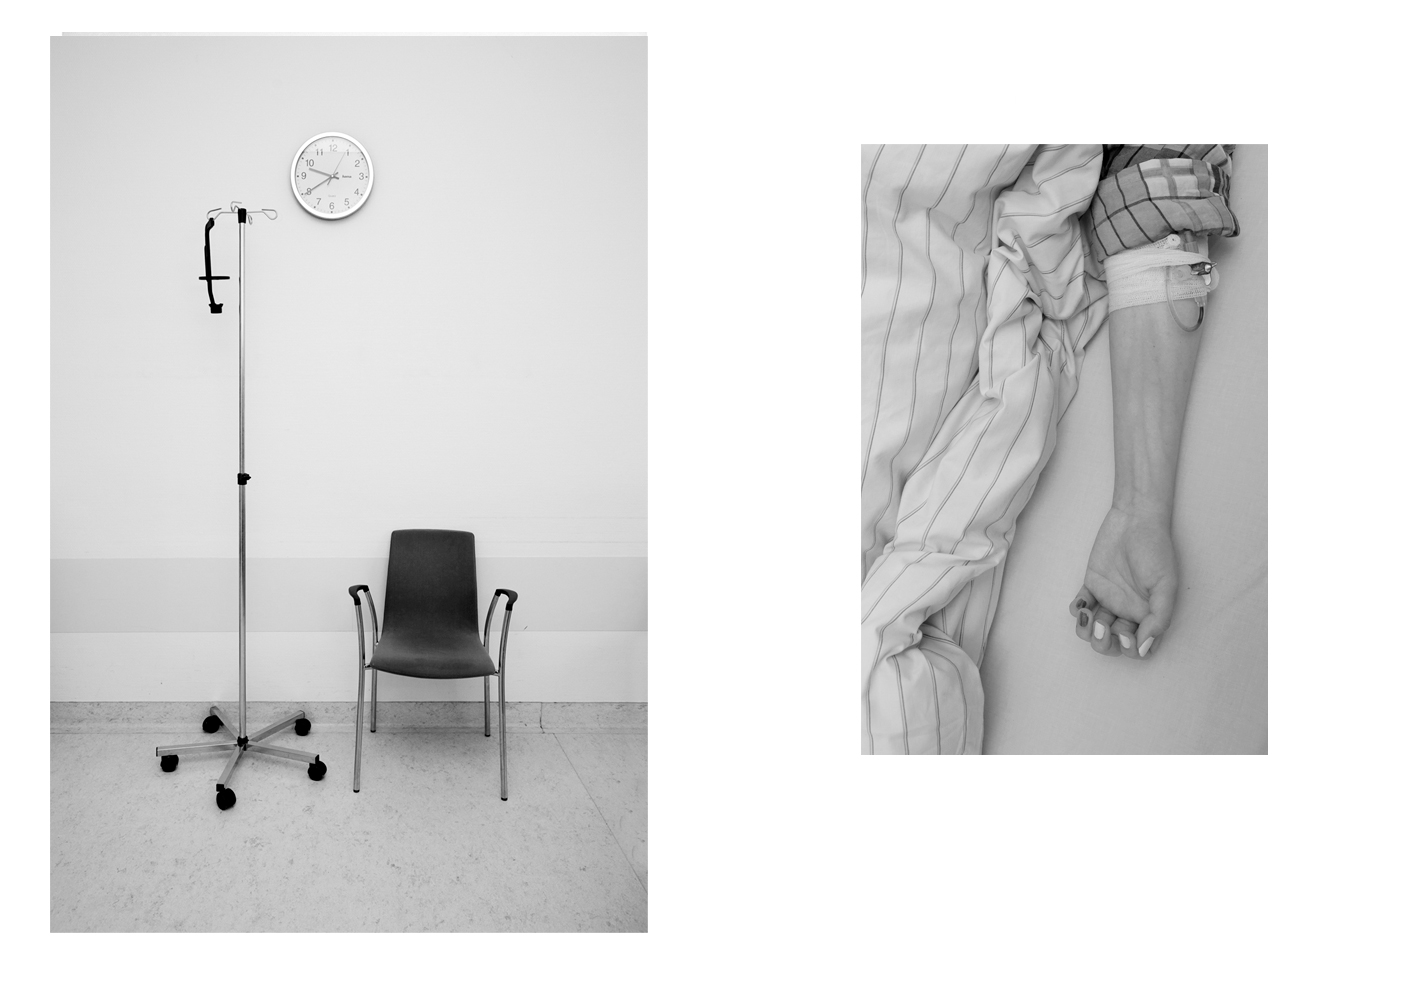 uebermorgenschnee: 2 images, one showing a stand with chemotreatment and one a jand holding a cover for the chemo treatmend